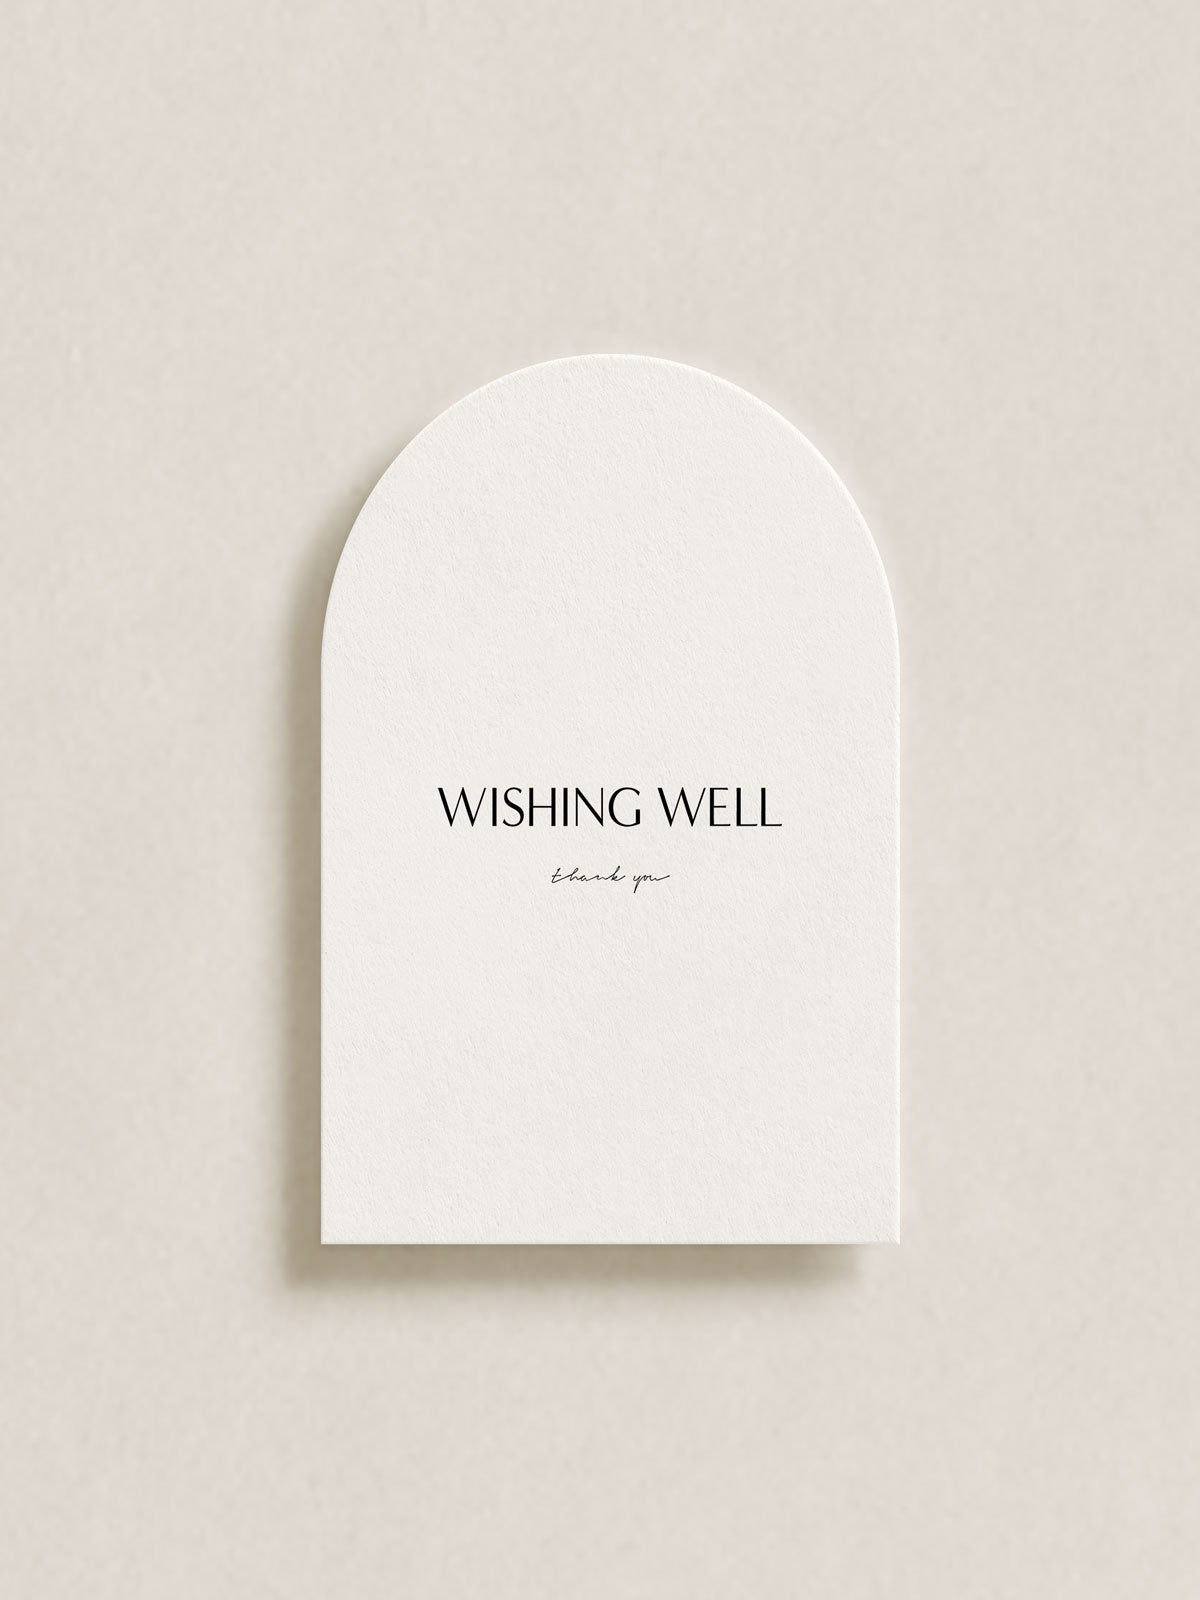 Wildly Wishing Well/Gift Sign